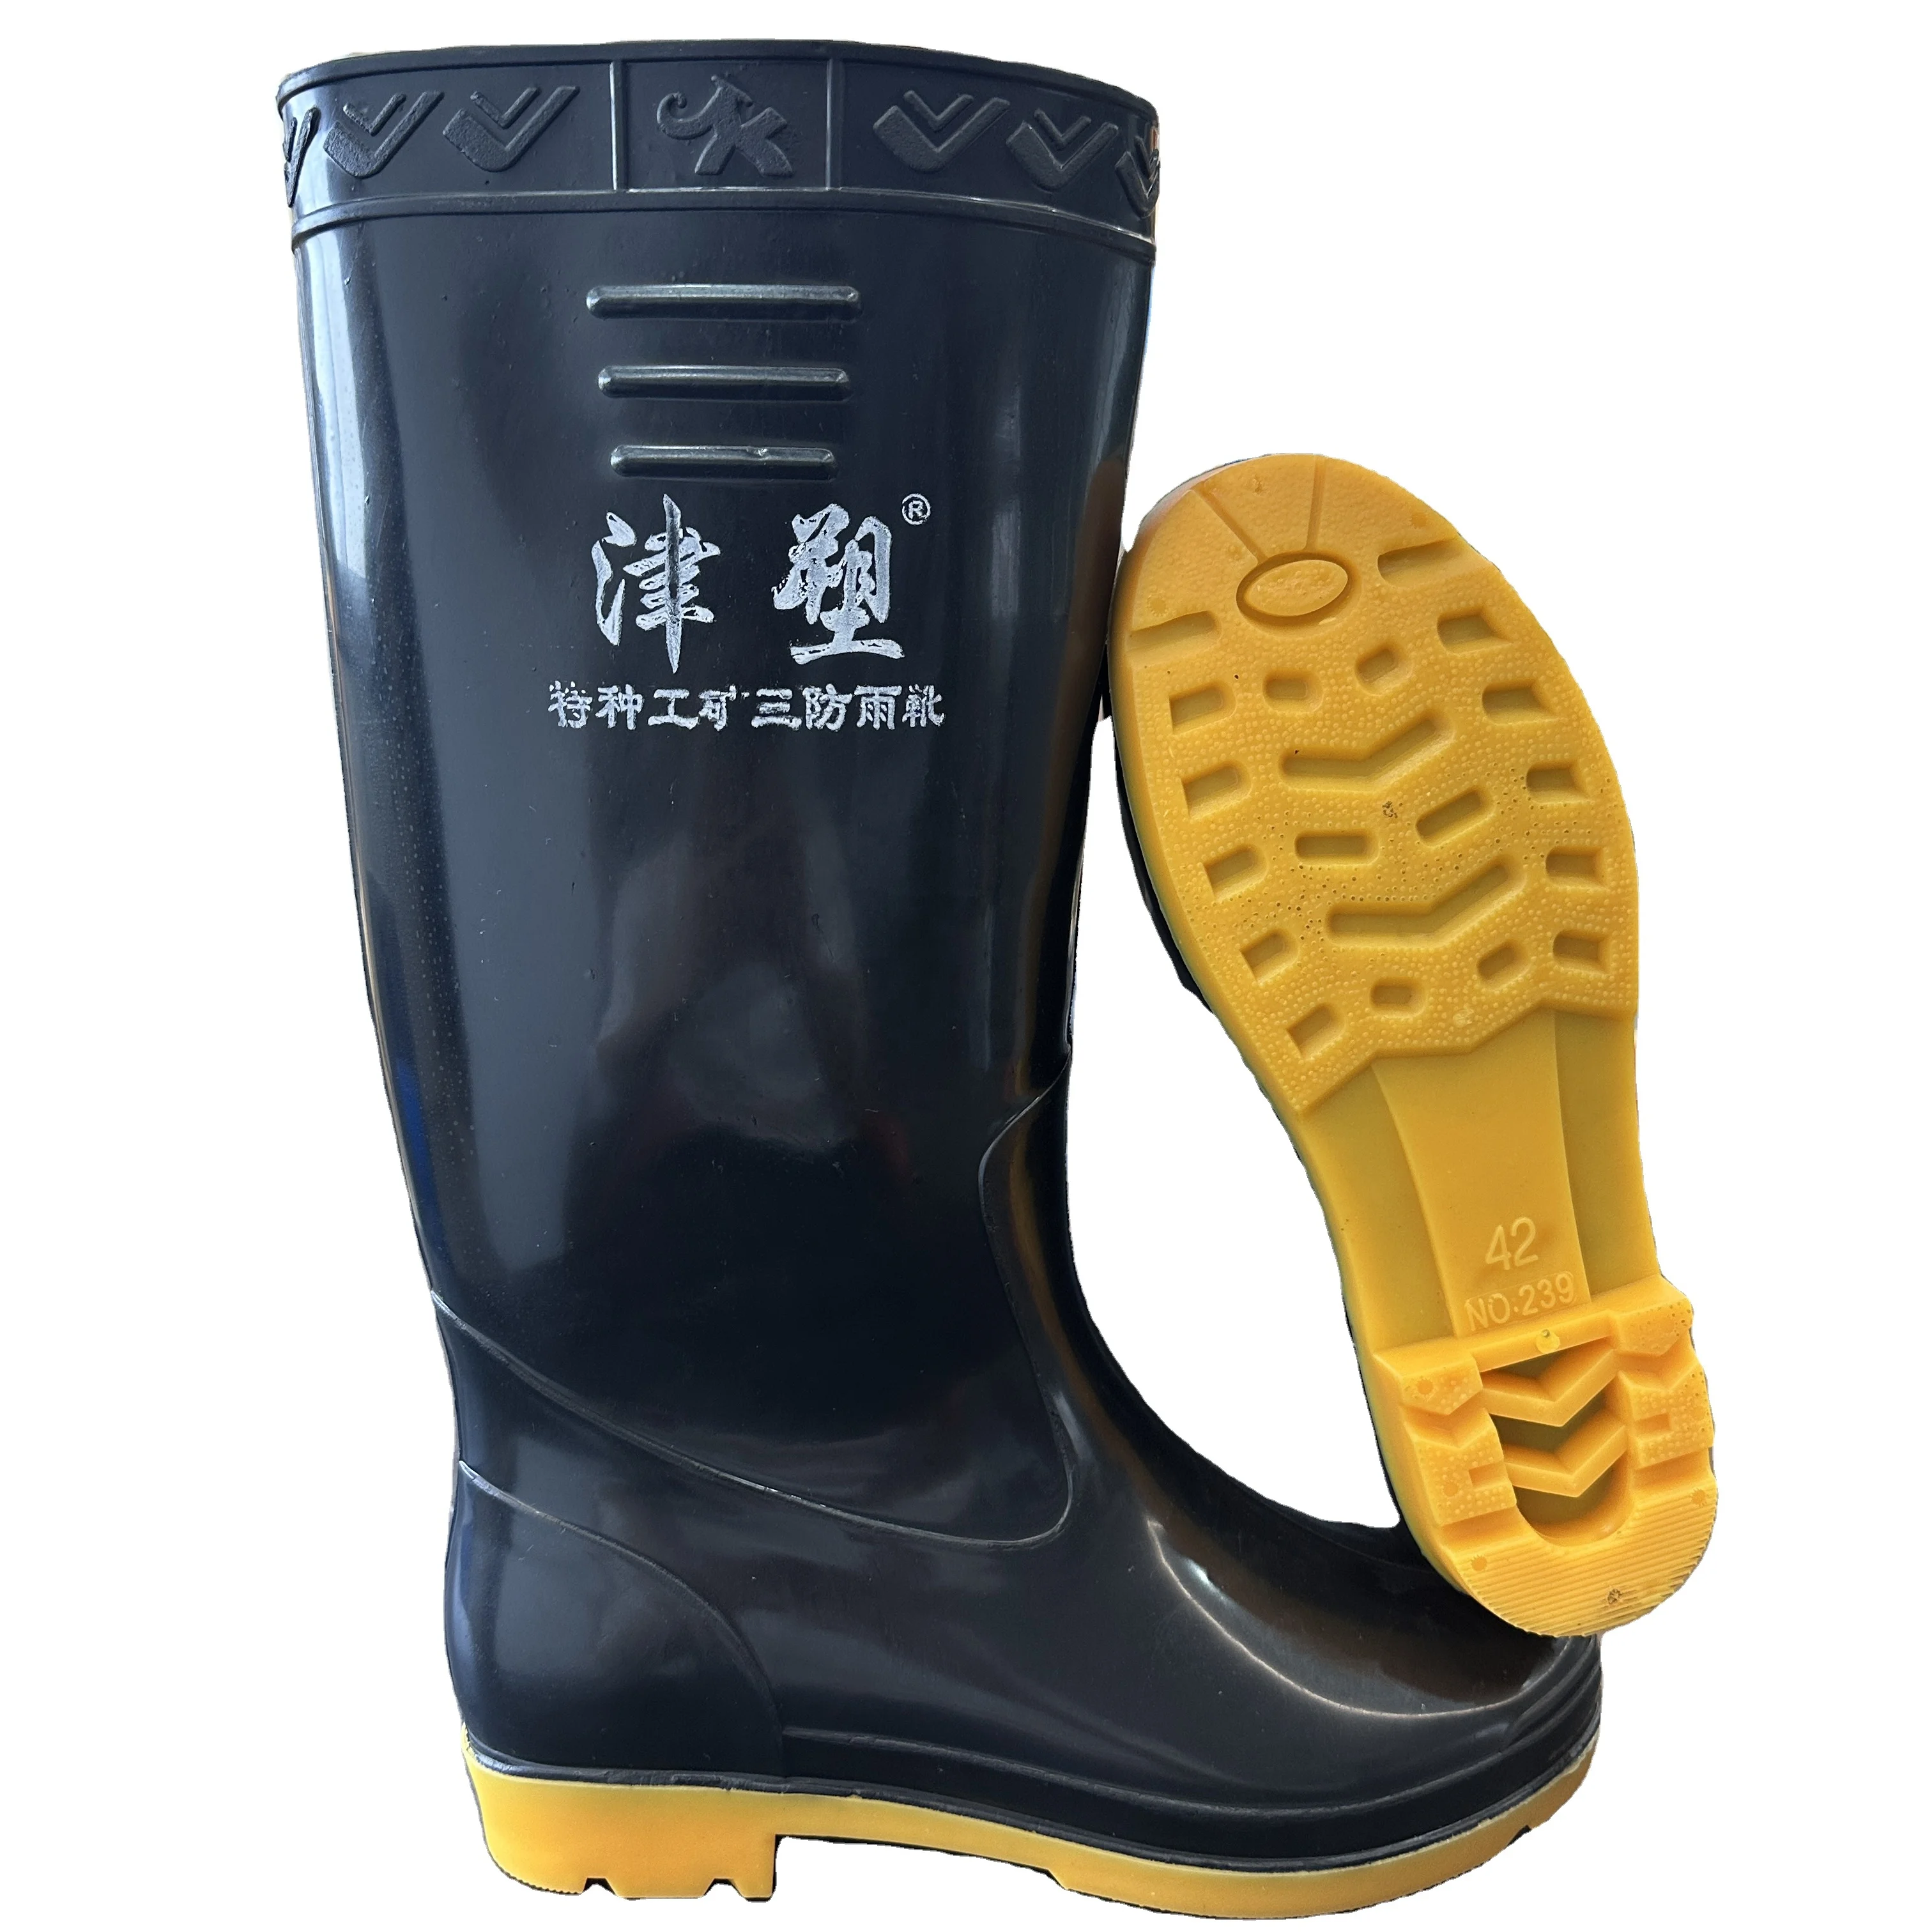 Cheap Pvc High Heel Safety Rain Boots Agricultural Waterproof For Men